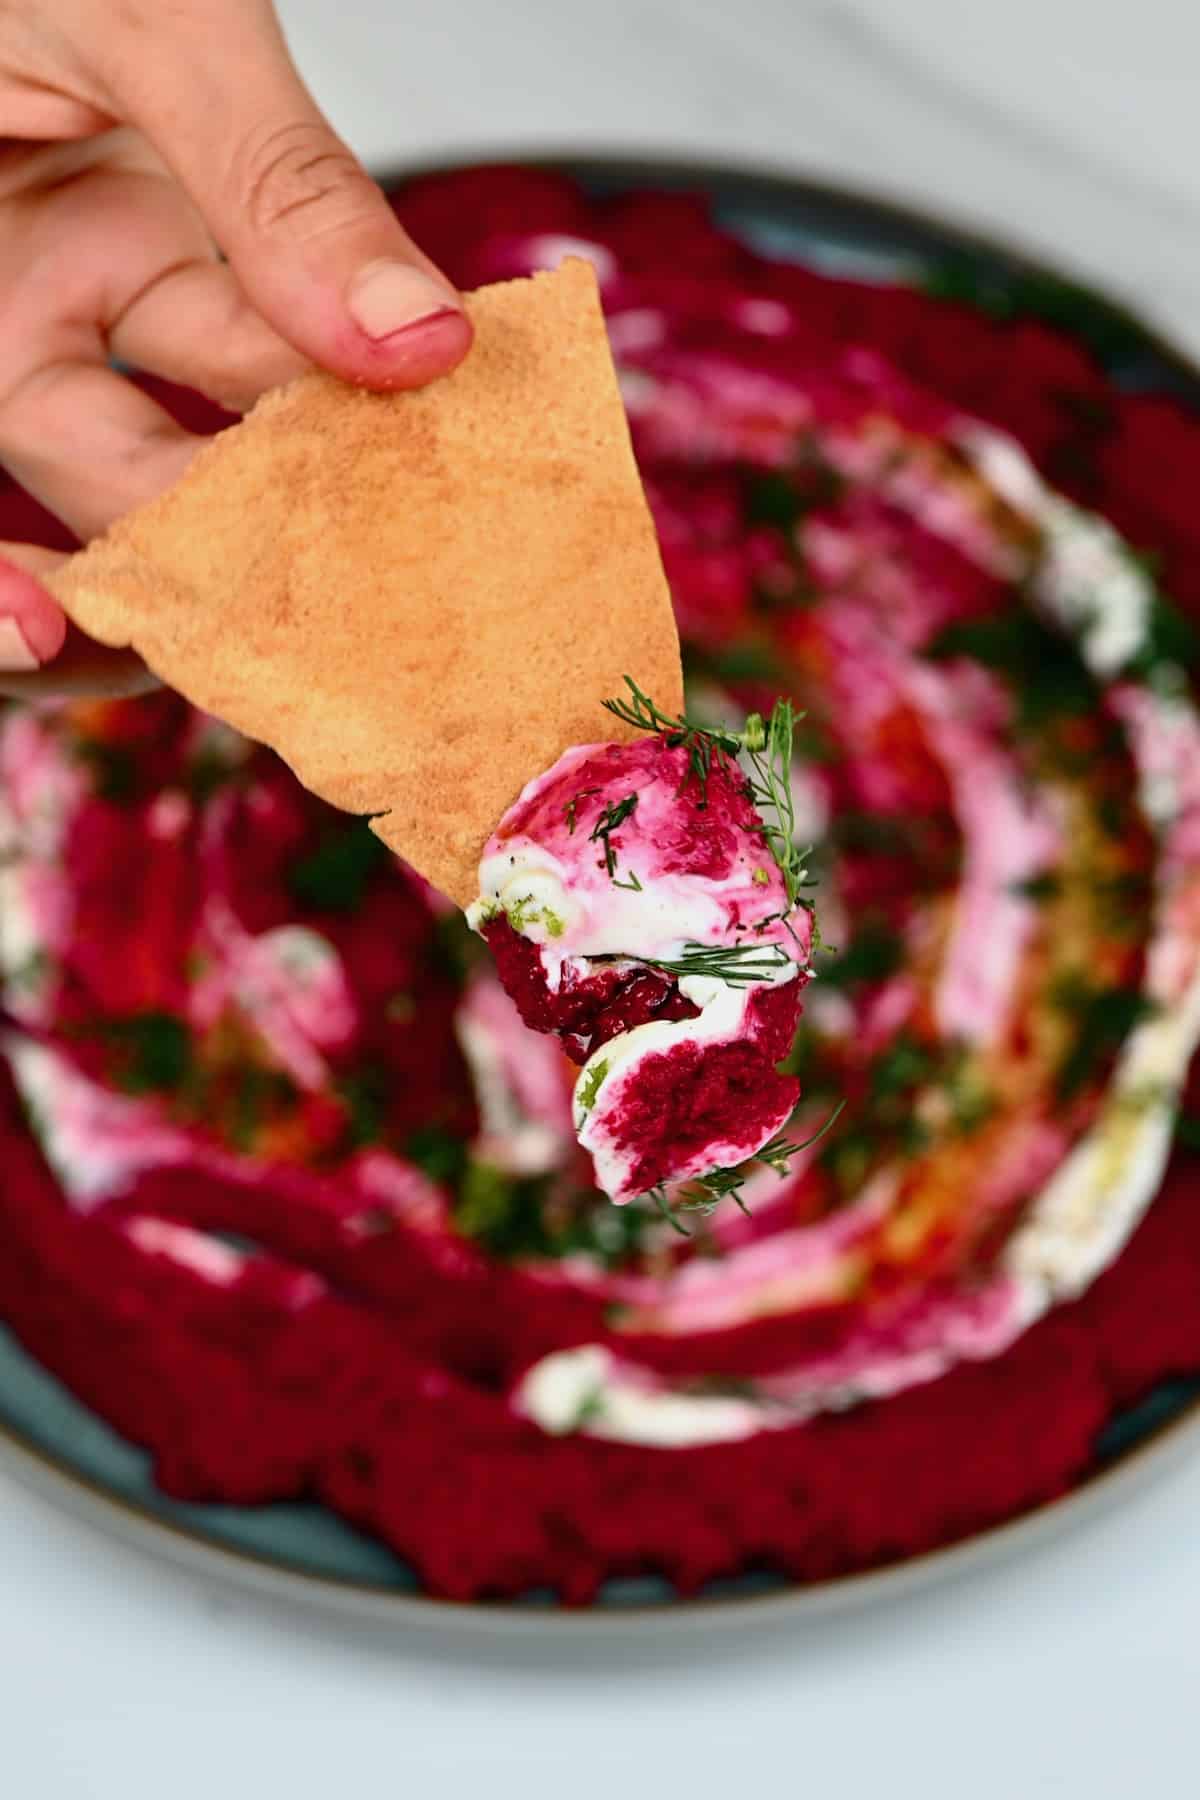 Chip topped with beetroot hummus